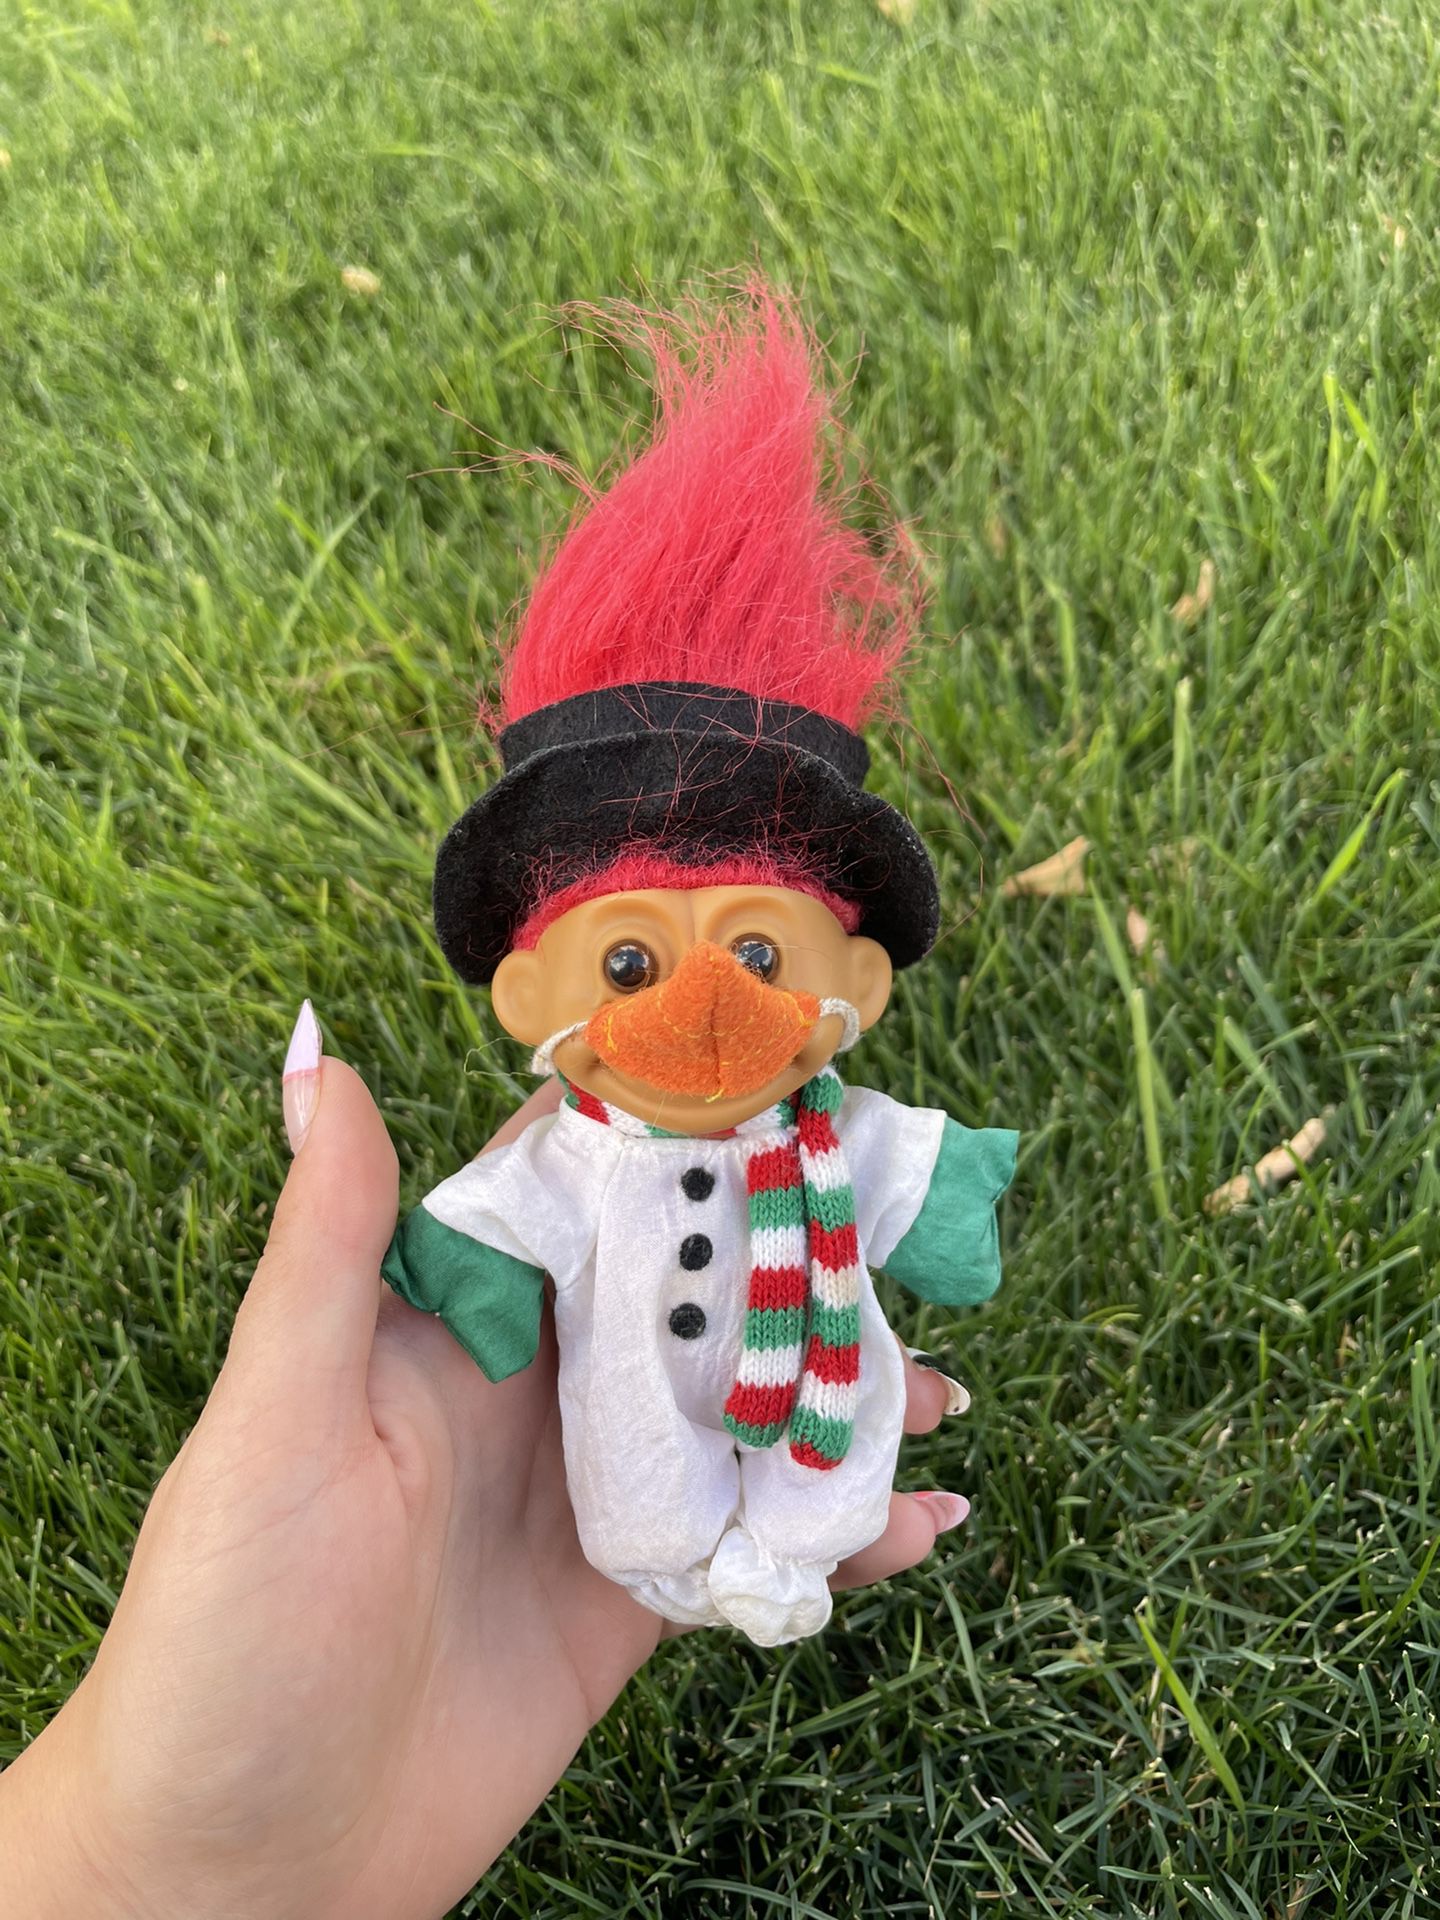 Vintage Russ Snowman Suit Troll Doll w/ Christmas Scarf Hat Nose W/Red Hair